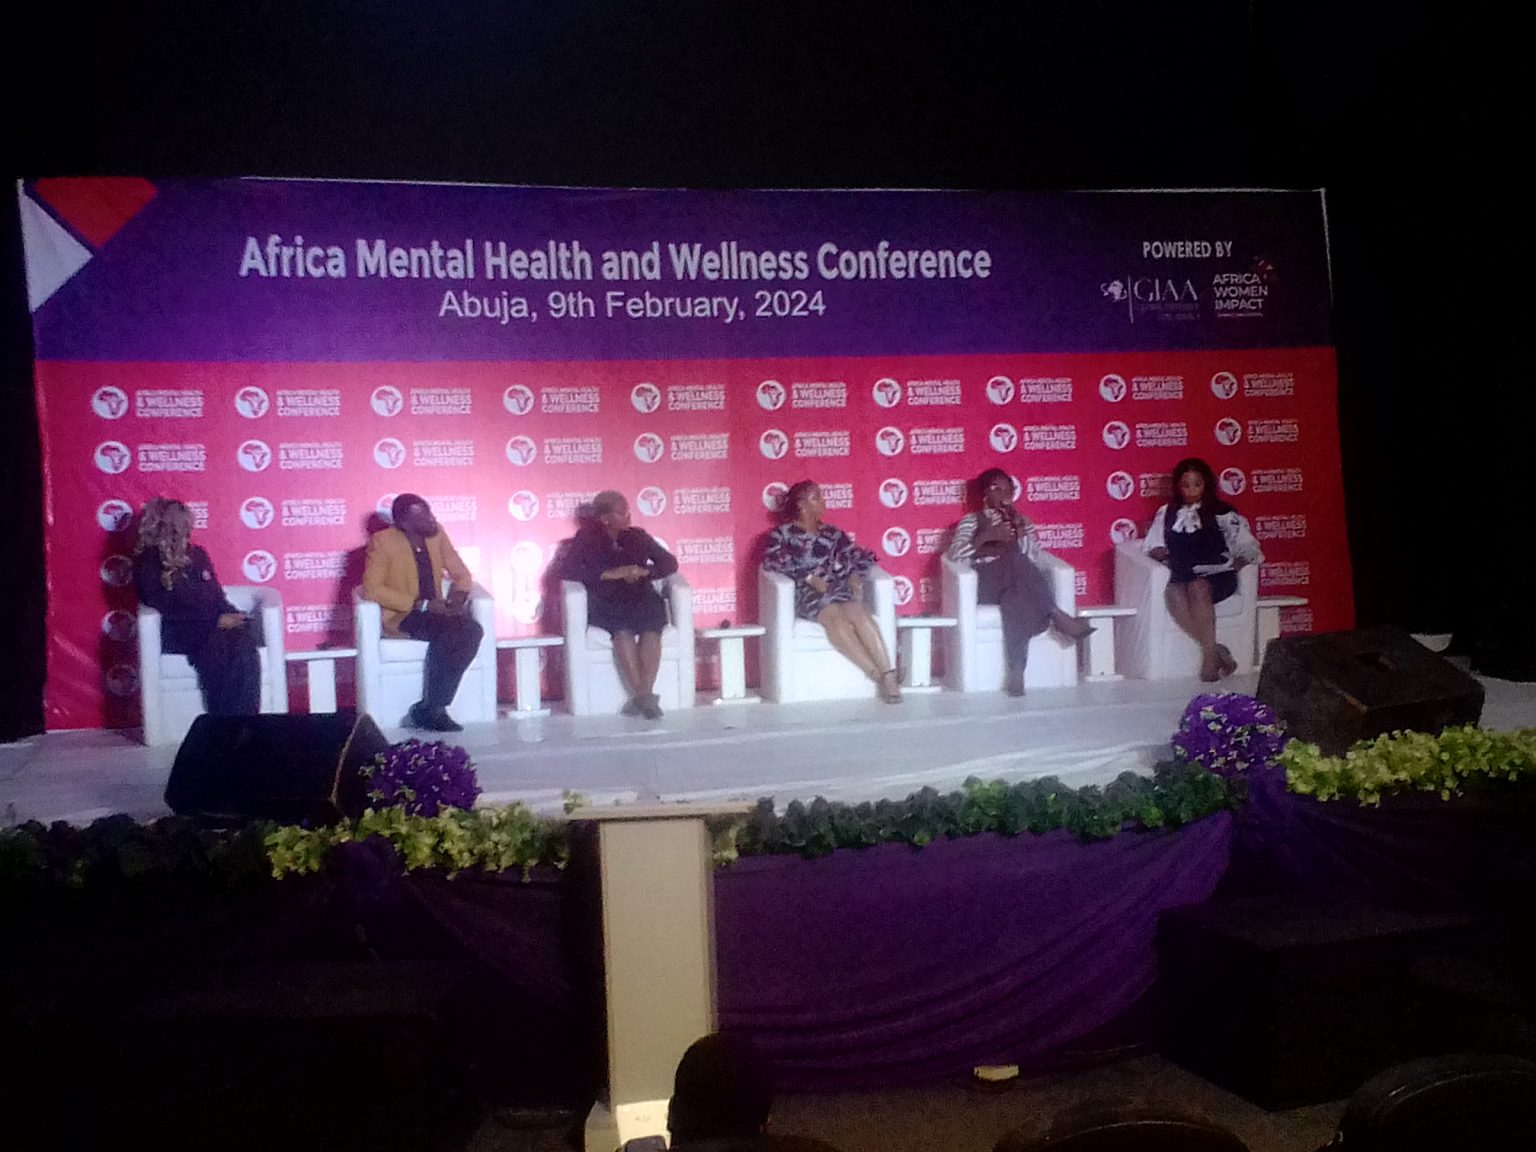 MediaageNG Mental Health Vital To Societal Well-being The African Mental Health and Wellness Conference, organised by the founders of the Africa Women Impact Summit was held on Friday in Abuja , the Nigerian capital, with the aim of addressing crucial aspects of well-being that significantly impacts the lives of individuals, families, and communities across Africa.